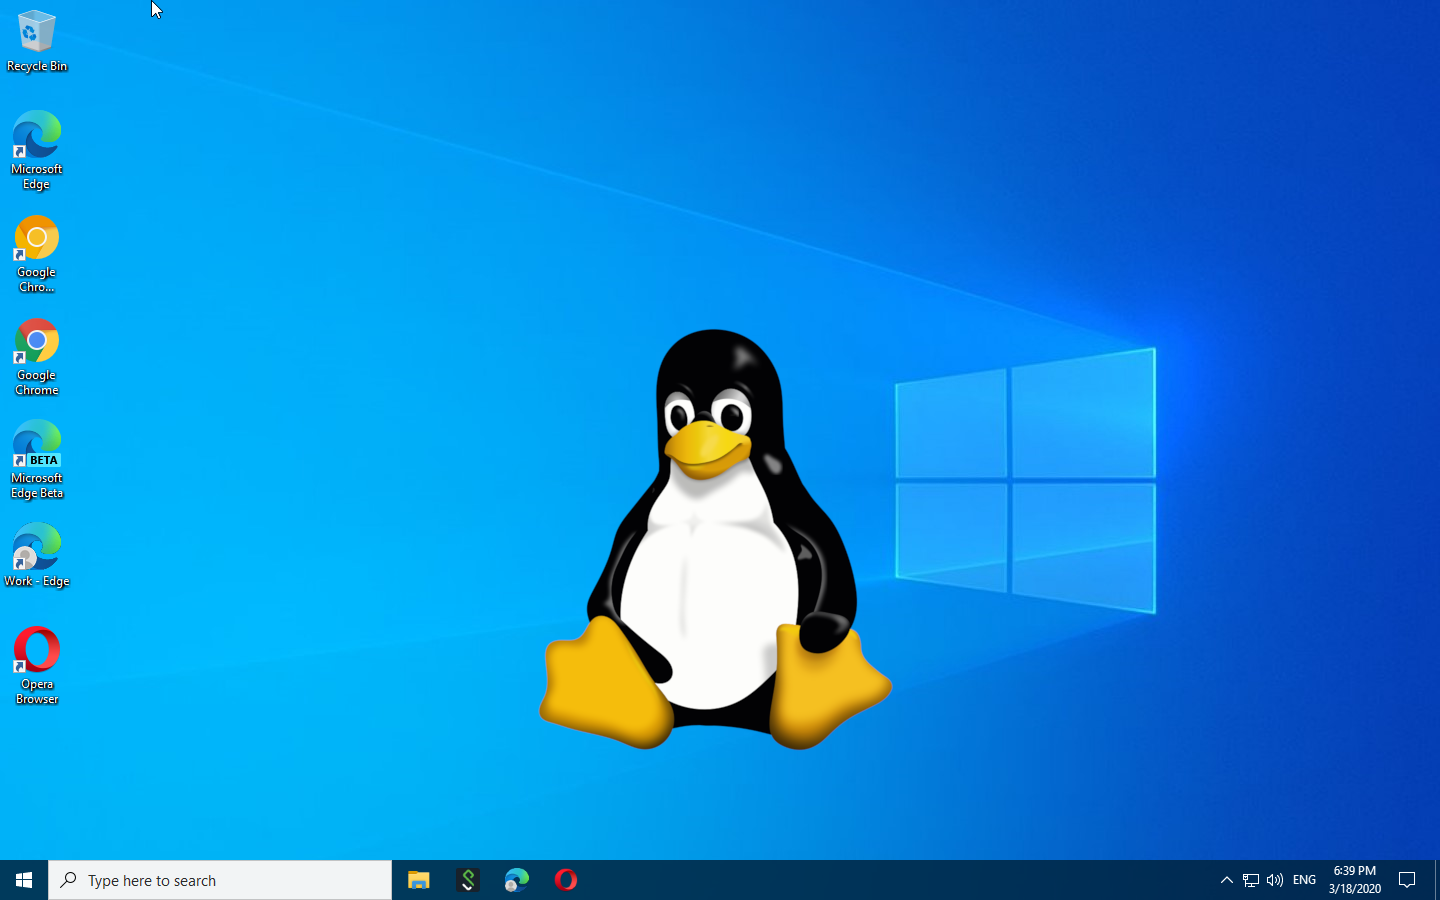 Windows Subsystem for Linux is making inroads with developers ...